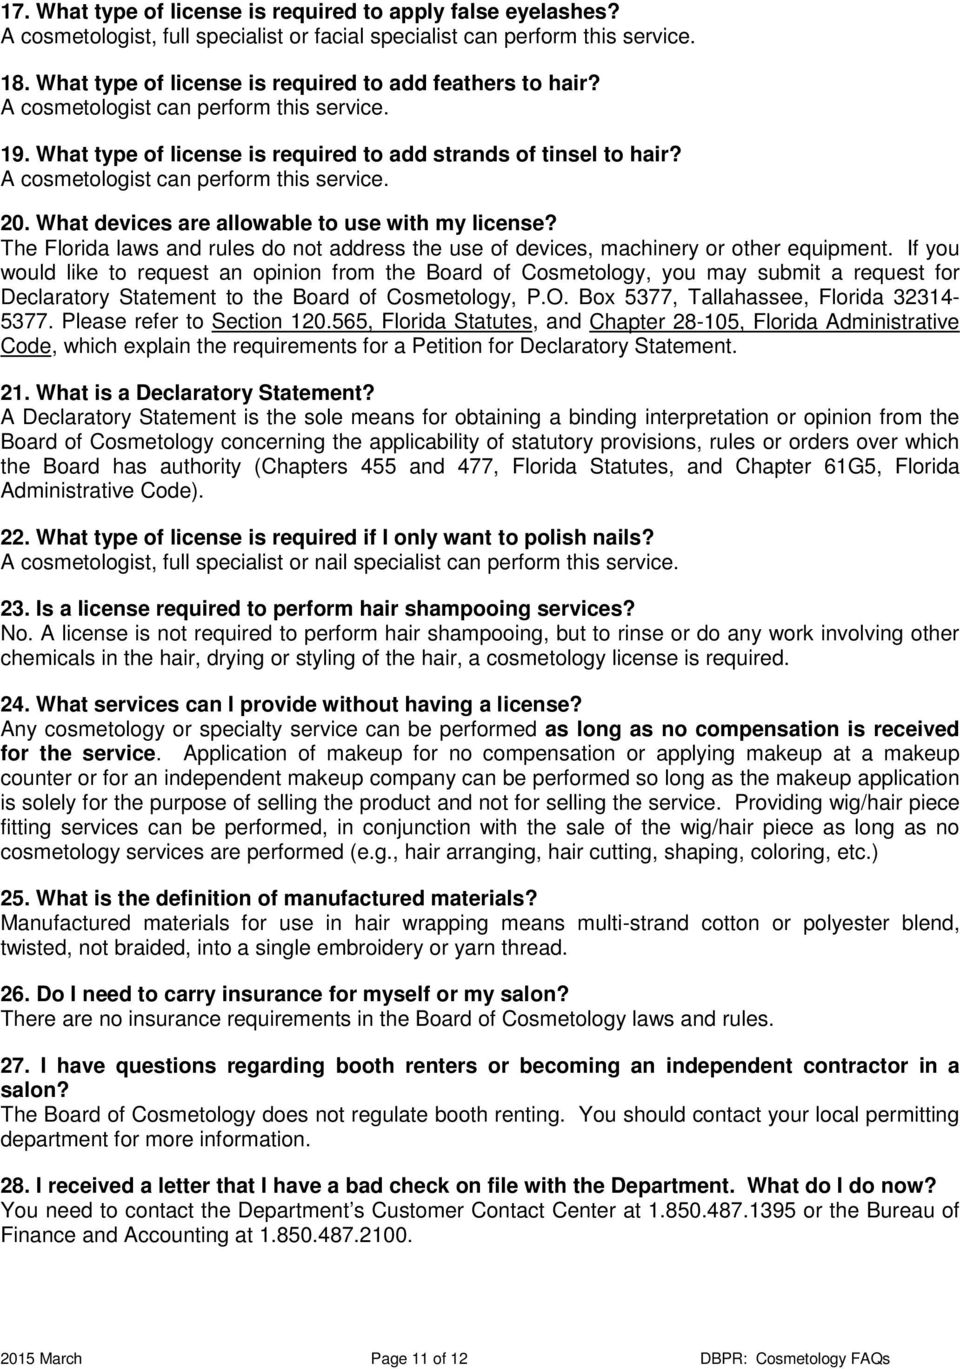 board of cosmetology frequently asked questions and answers - pdf